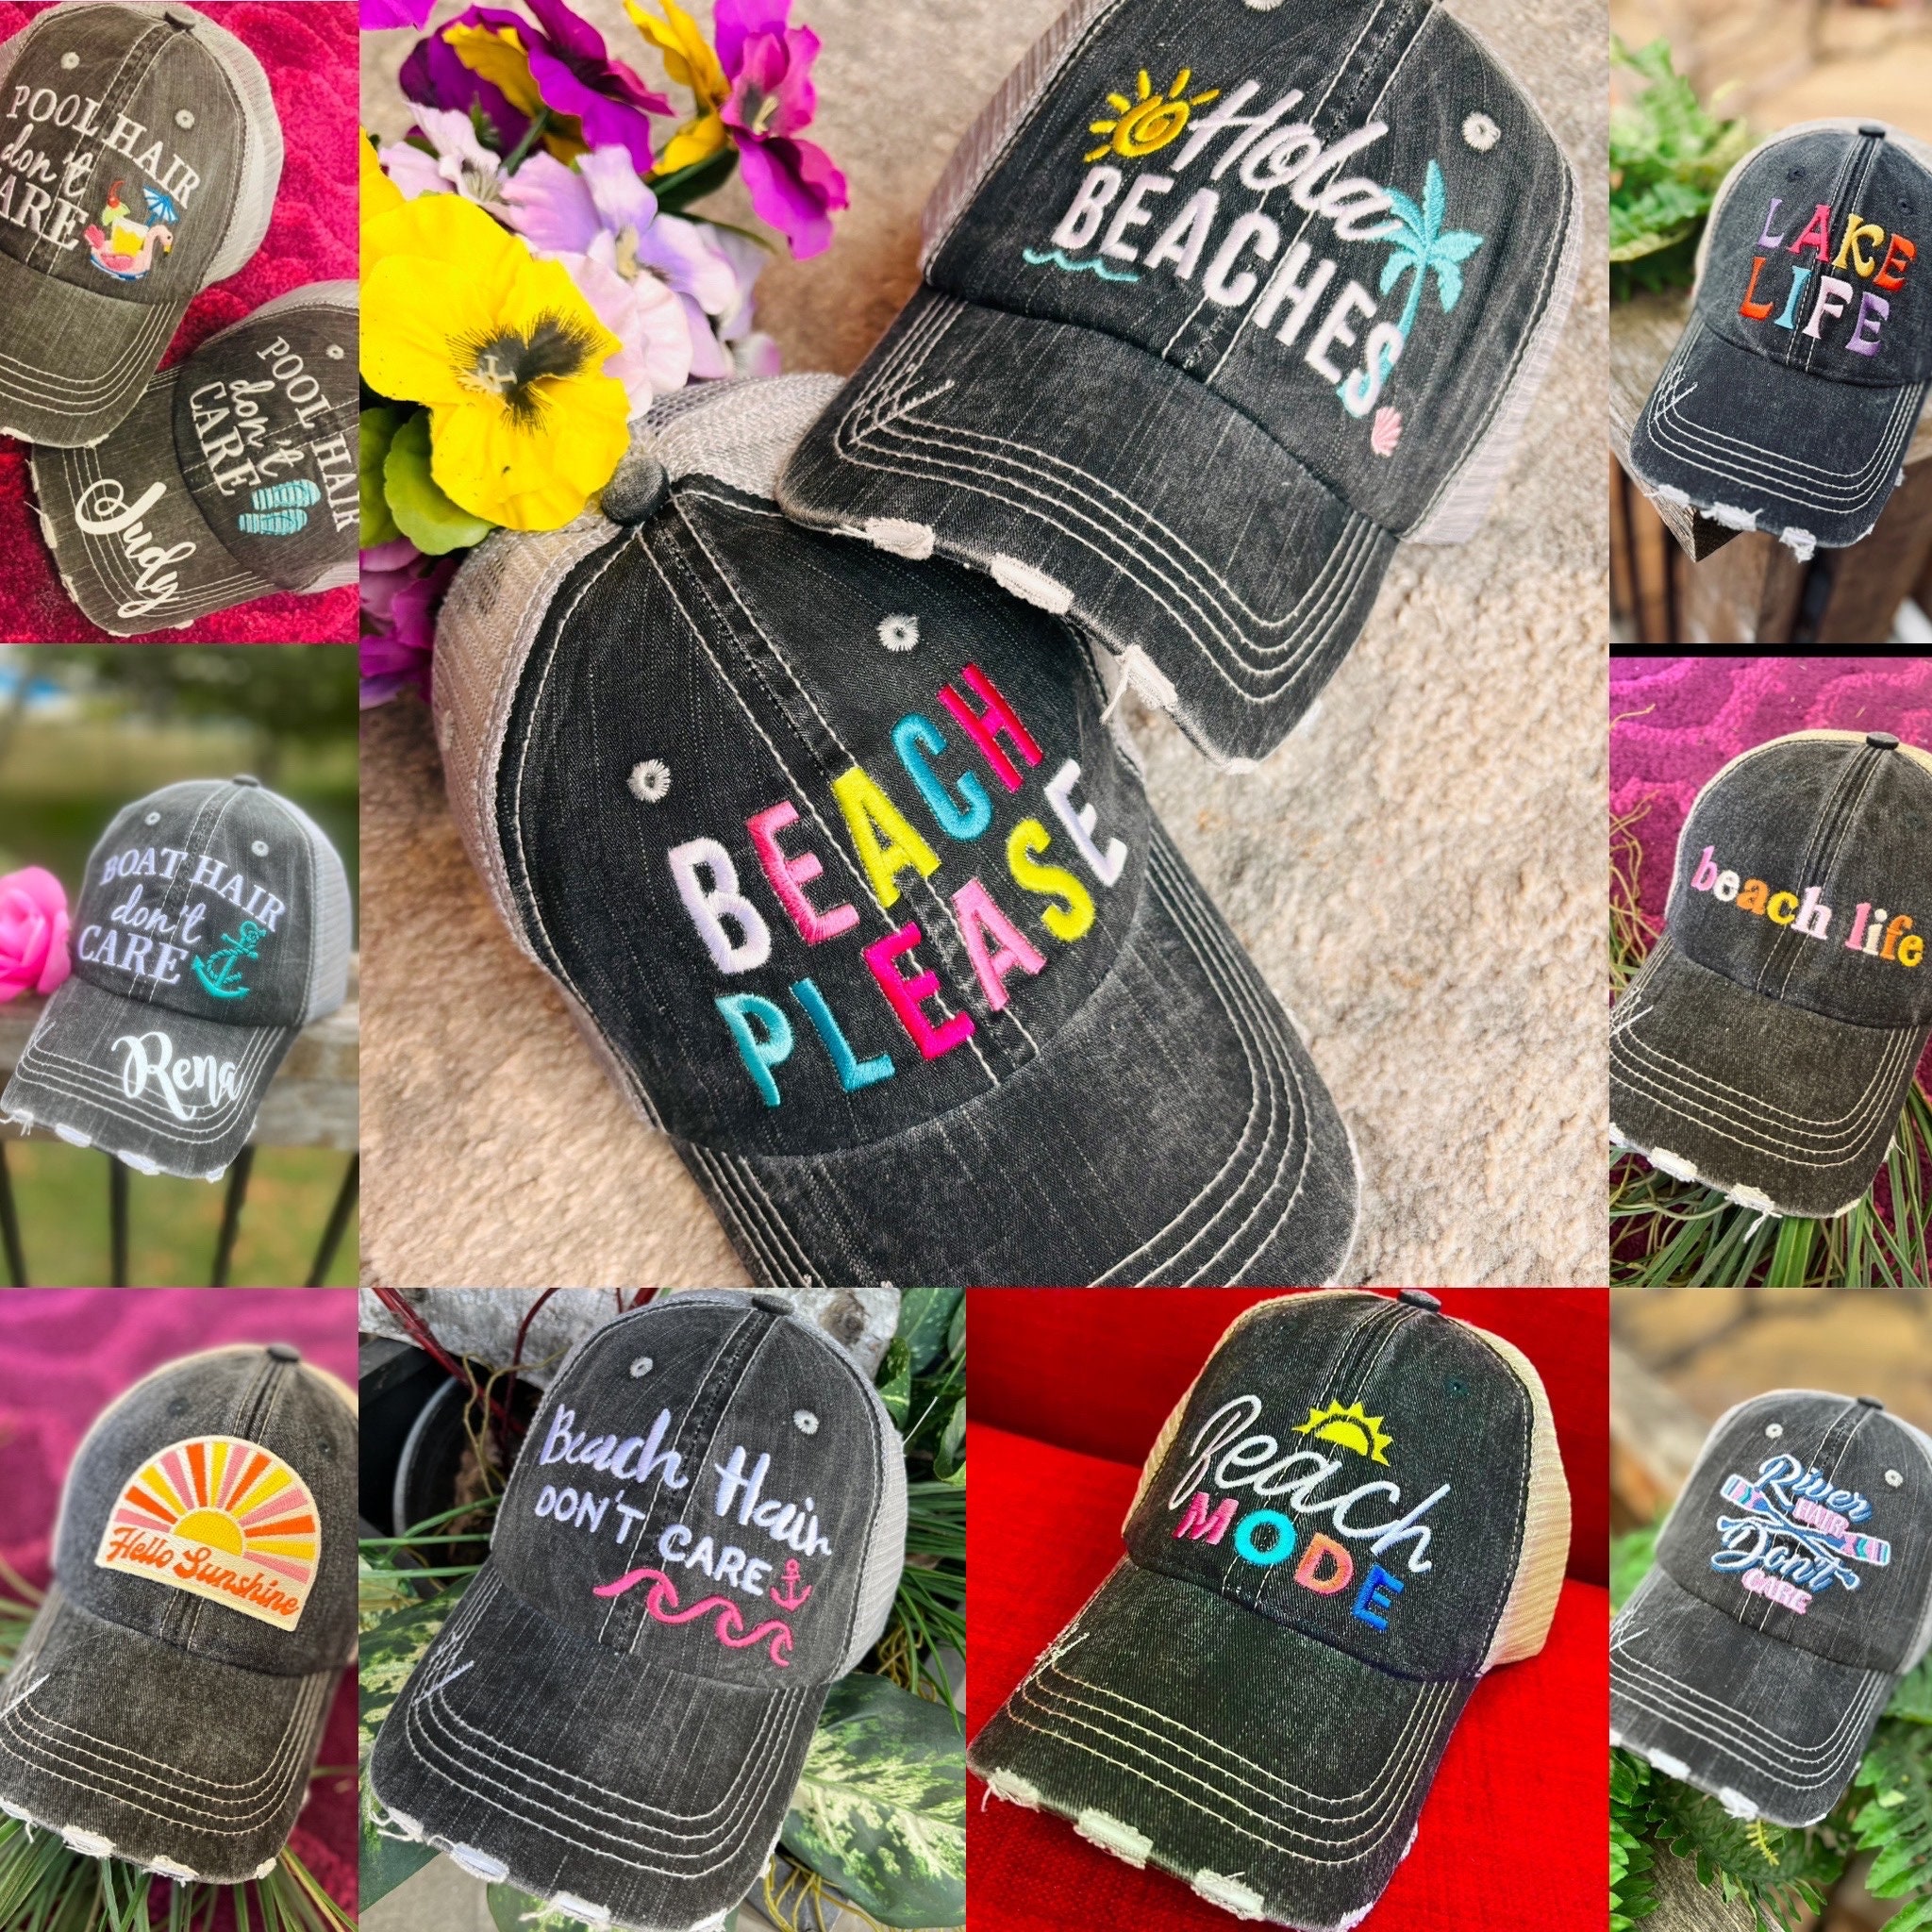 Personalized Kayak Hats Kayak Hair Dont Care Embroidered Gray Unisex  Trucker Caps Boat Paddle River Lake Womens Mens Pink Teal Kayaking 